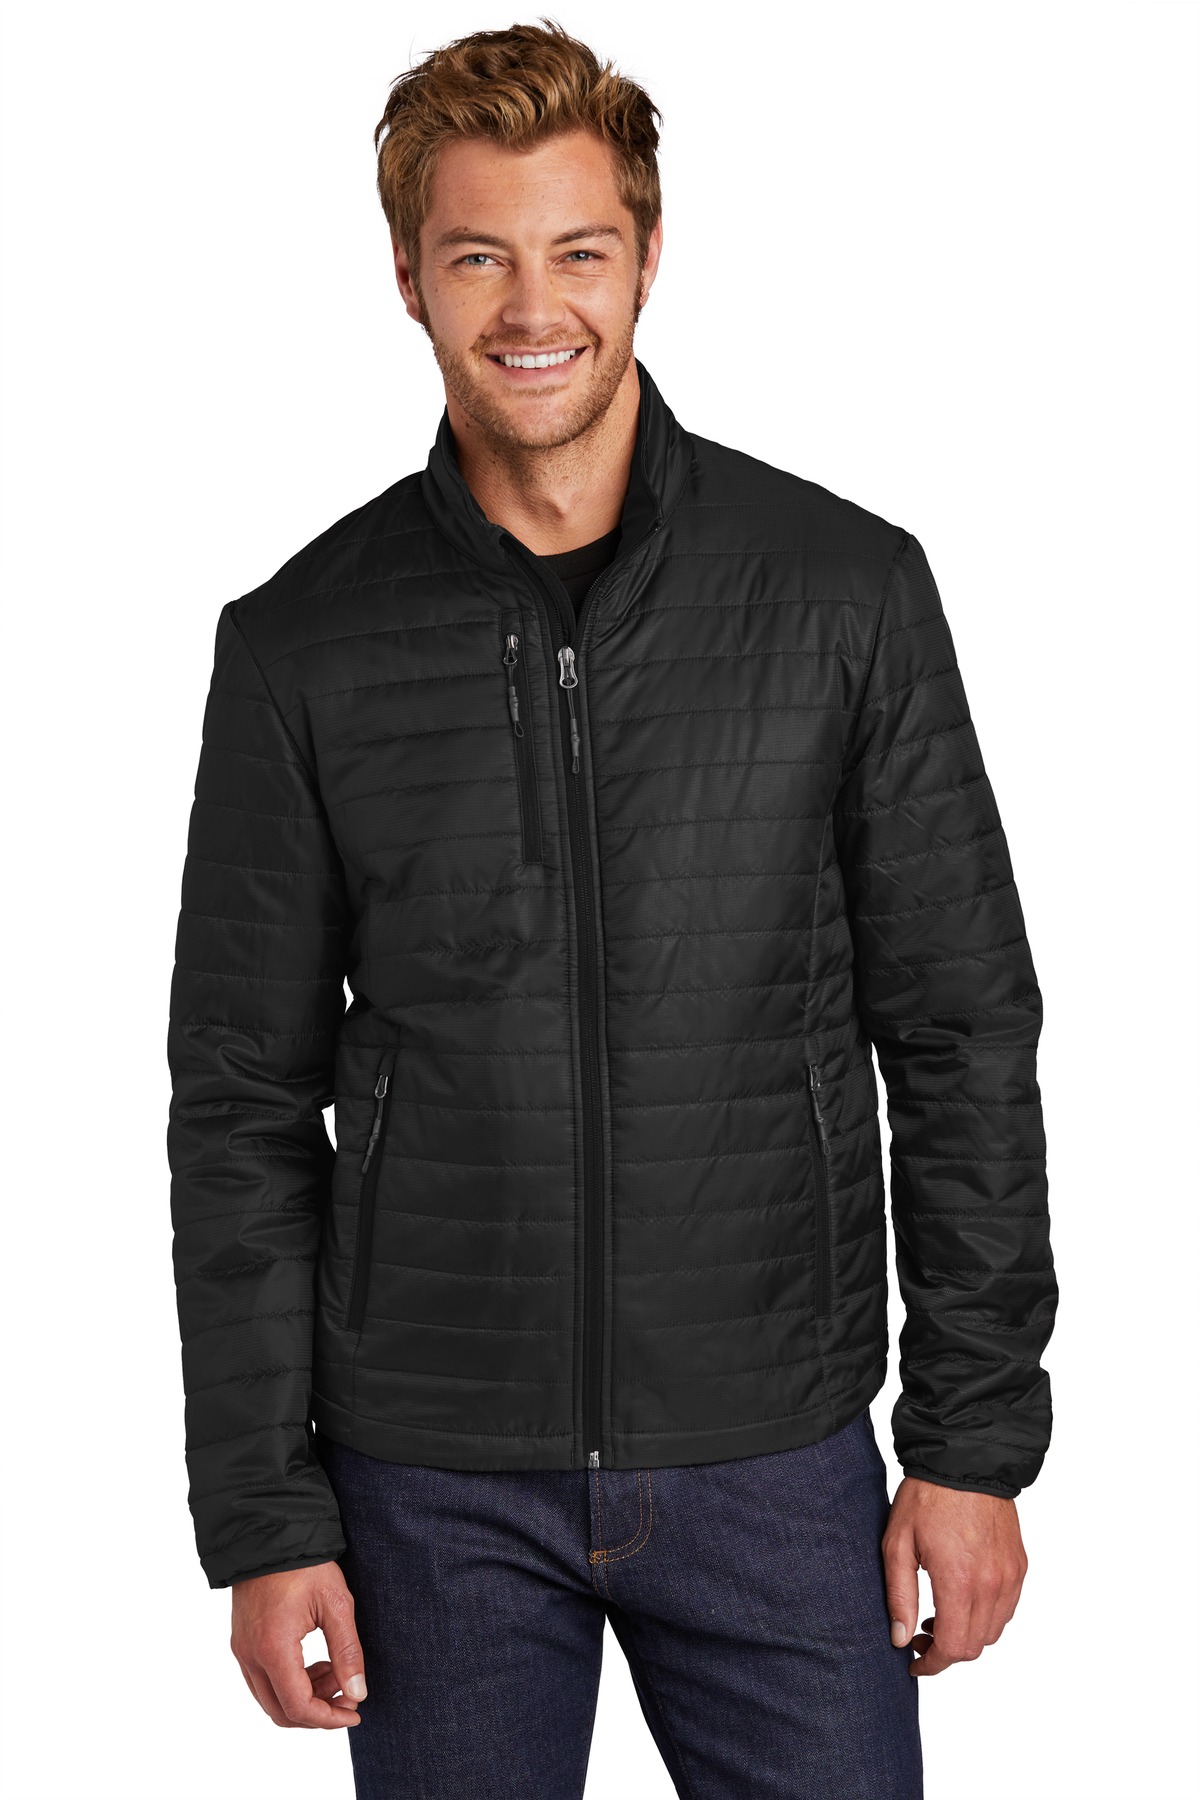 Port Authority Packable Puffy Jacket-Port Authority